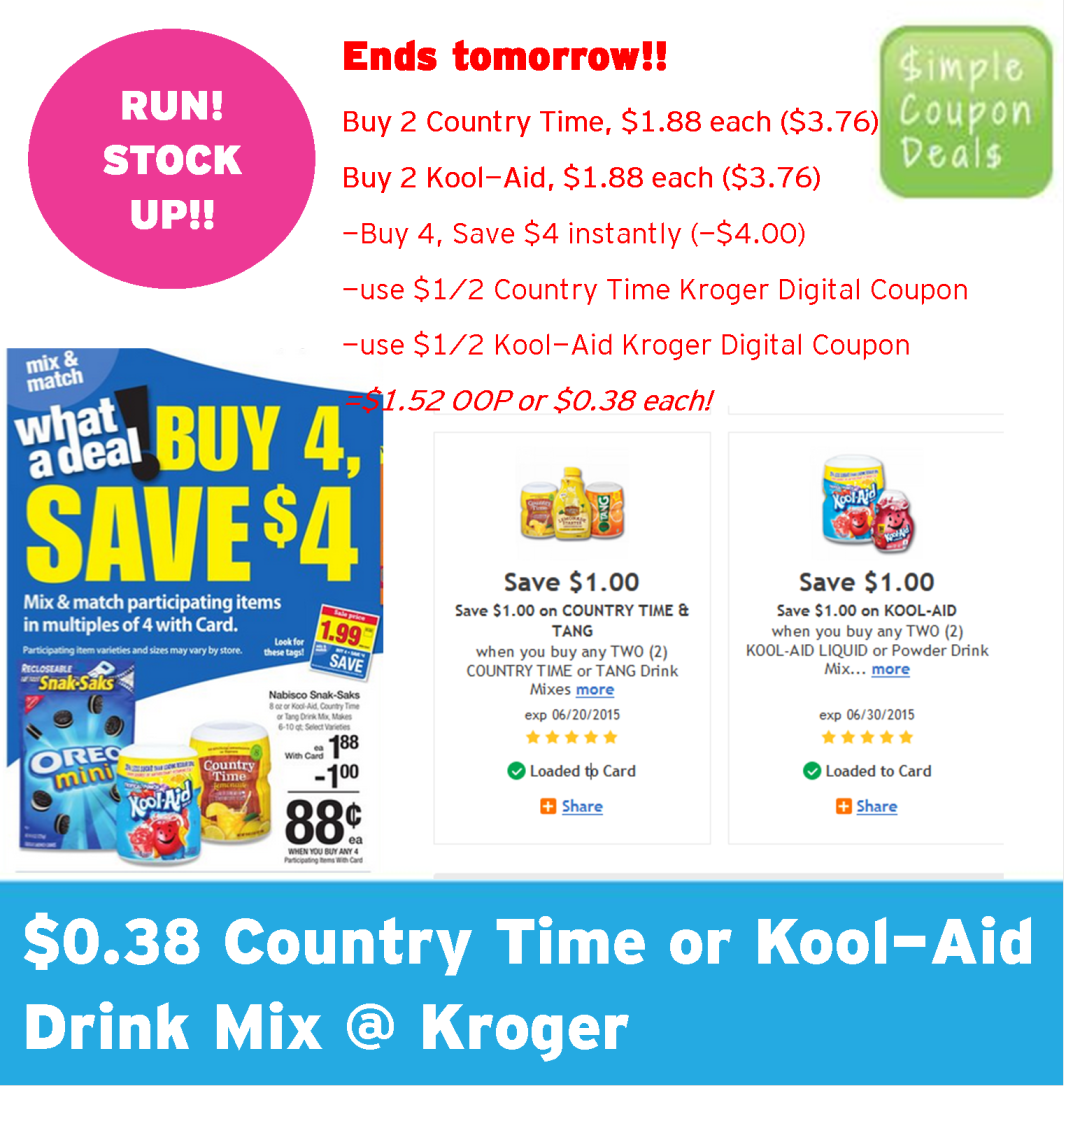 HURRY! Ends Tomorrow! 0.38 Country Time, Tang or KoolAid Drink Mixes